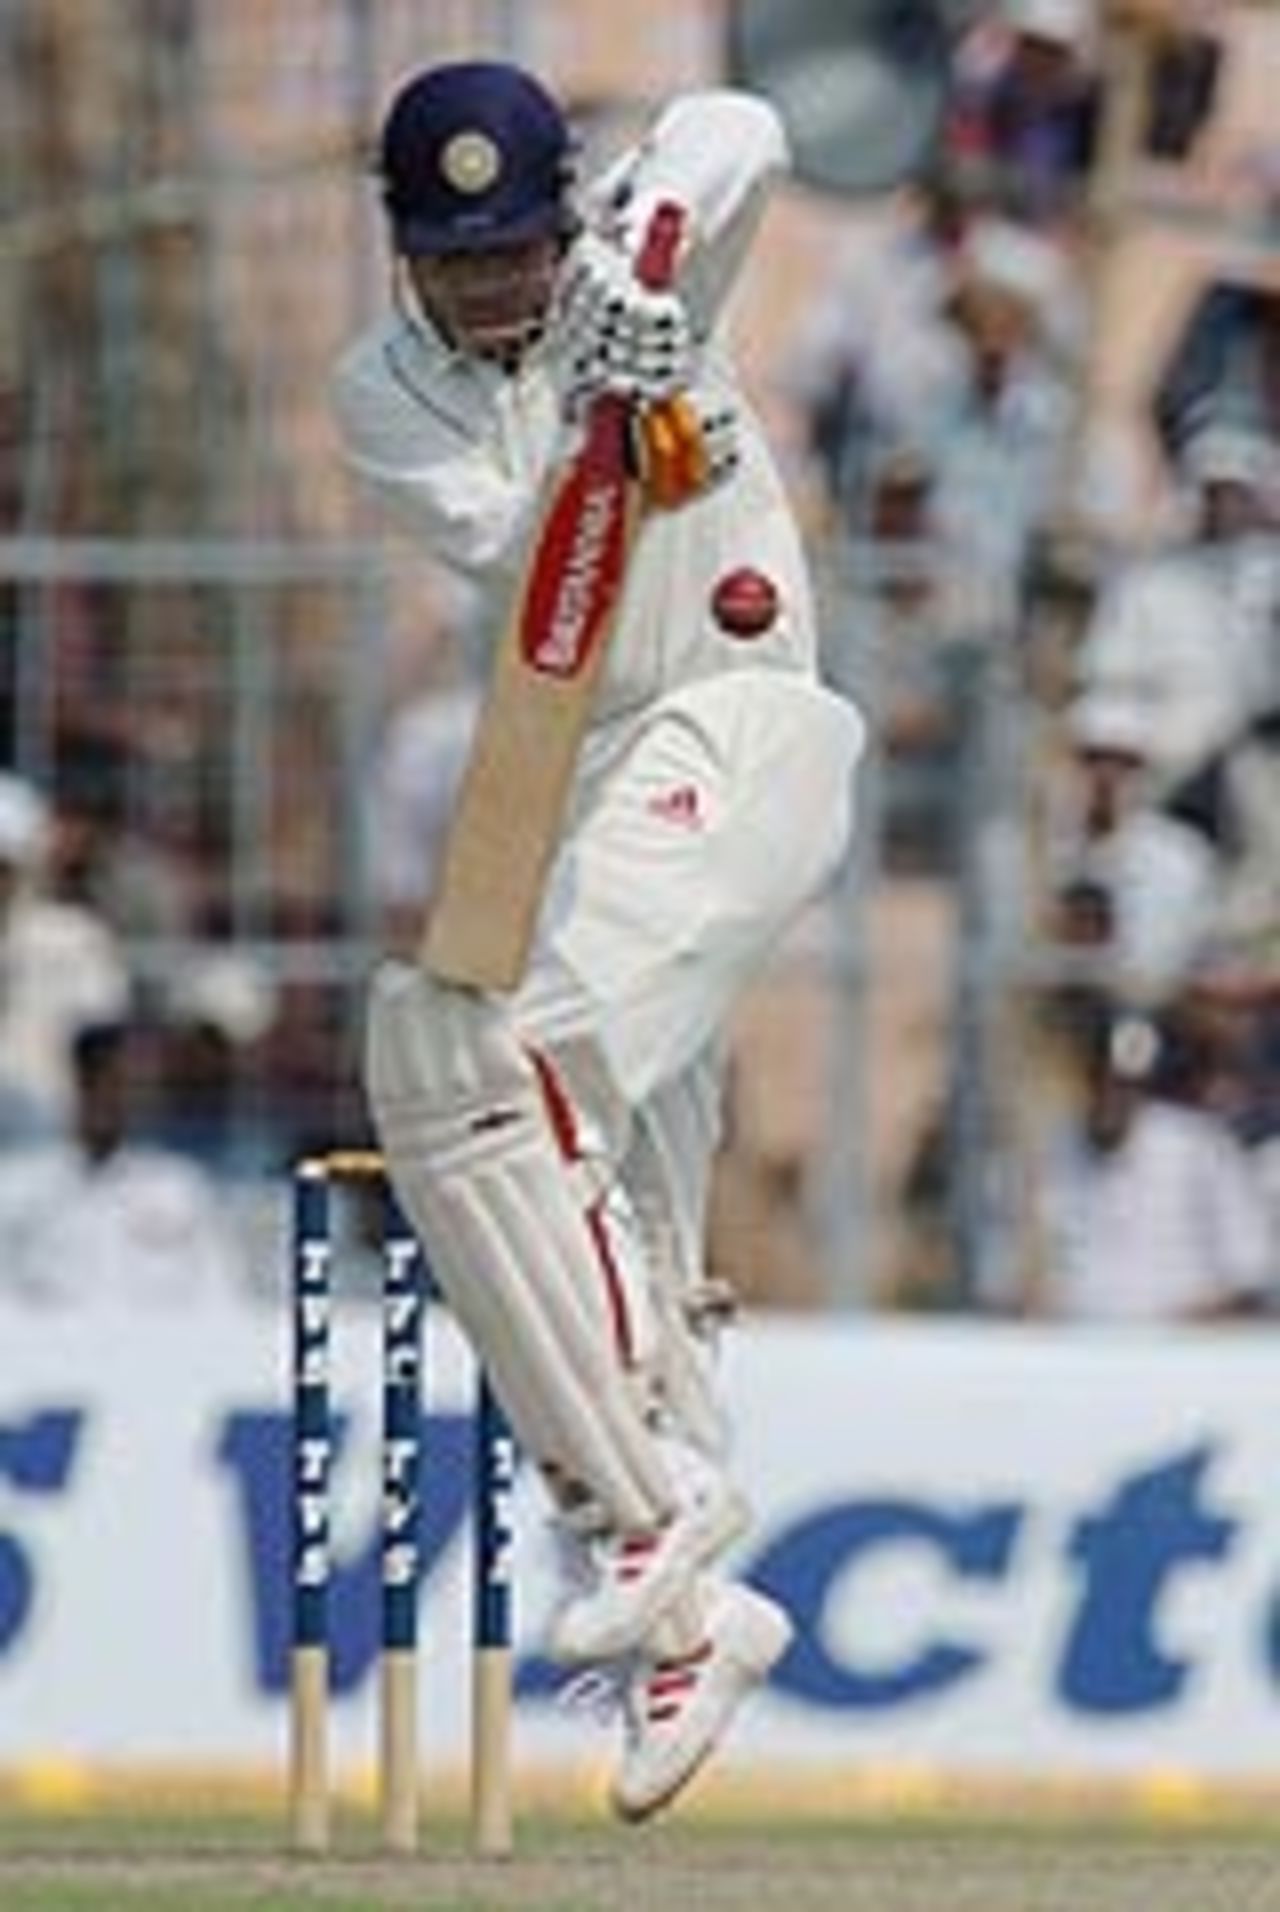 Virender Sehwag in terrific form, India v Pakistan, 2nd Test, Kolkata, 1st day, March 16, 2005